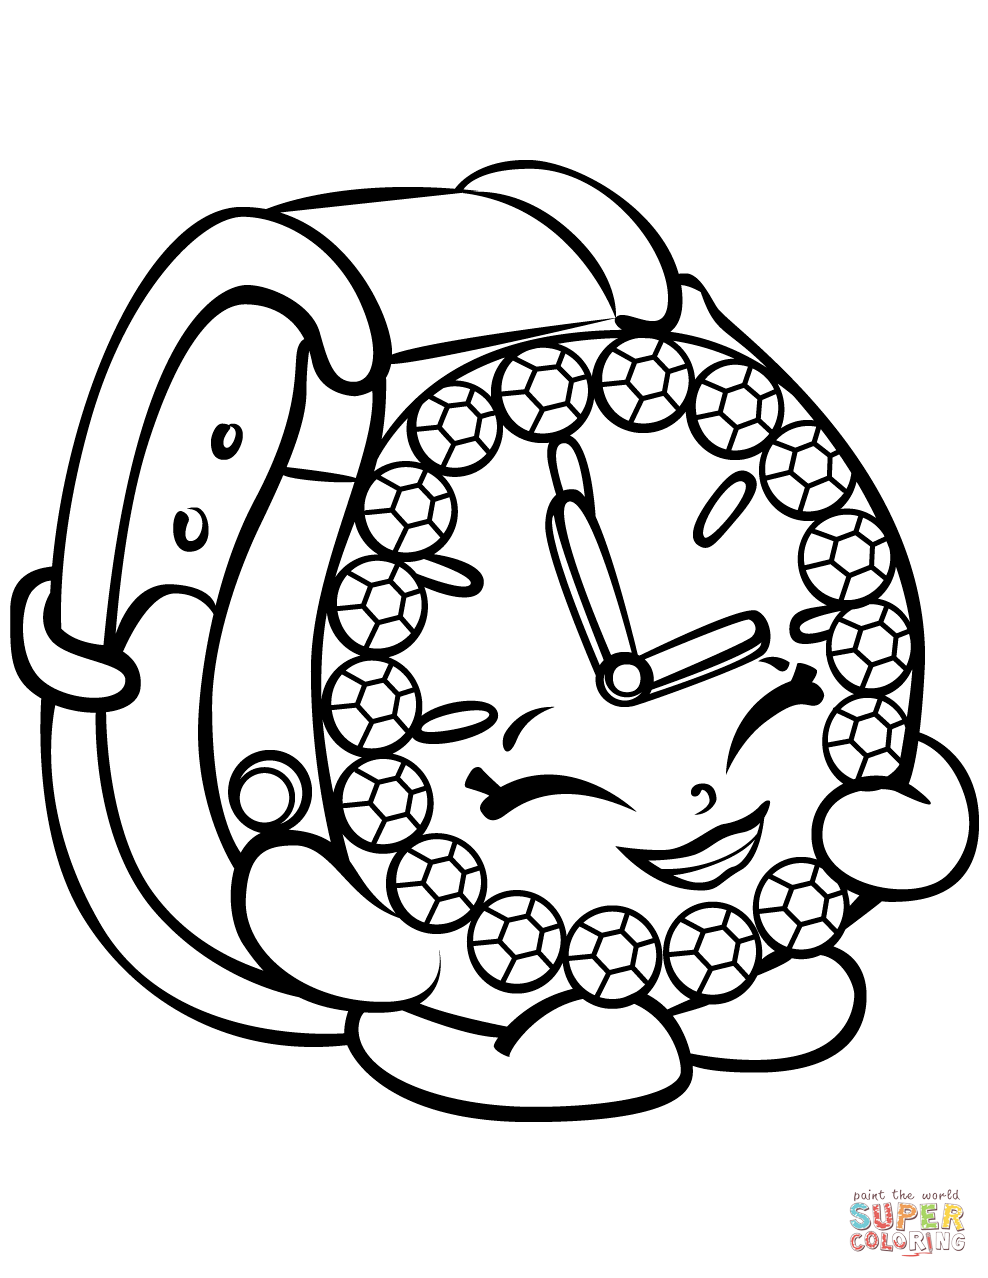 Ticky Tock Watch Shopkin coloring page